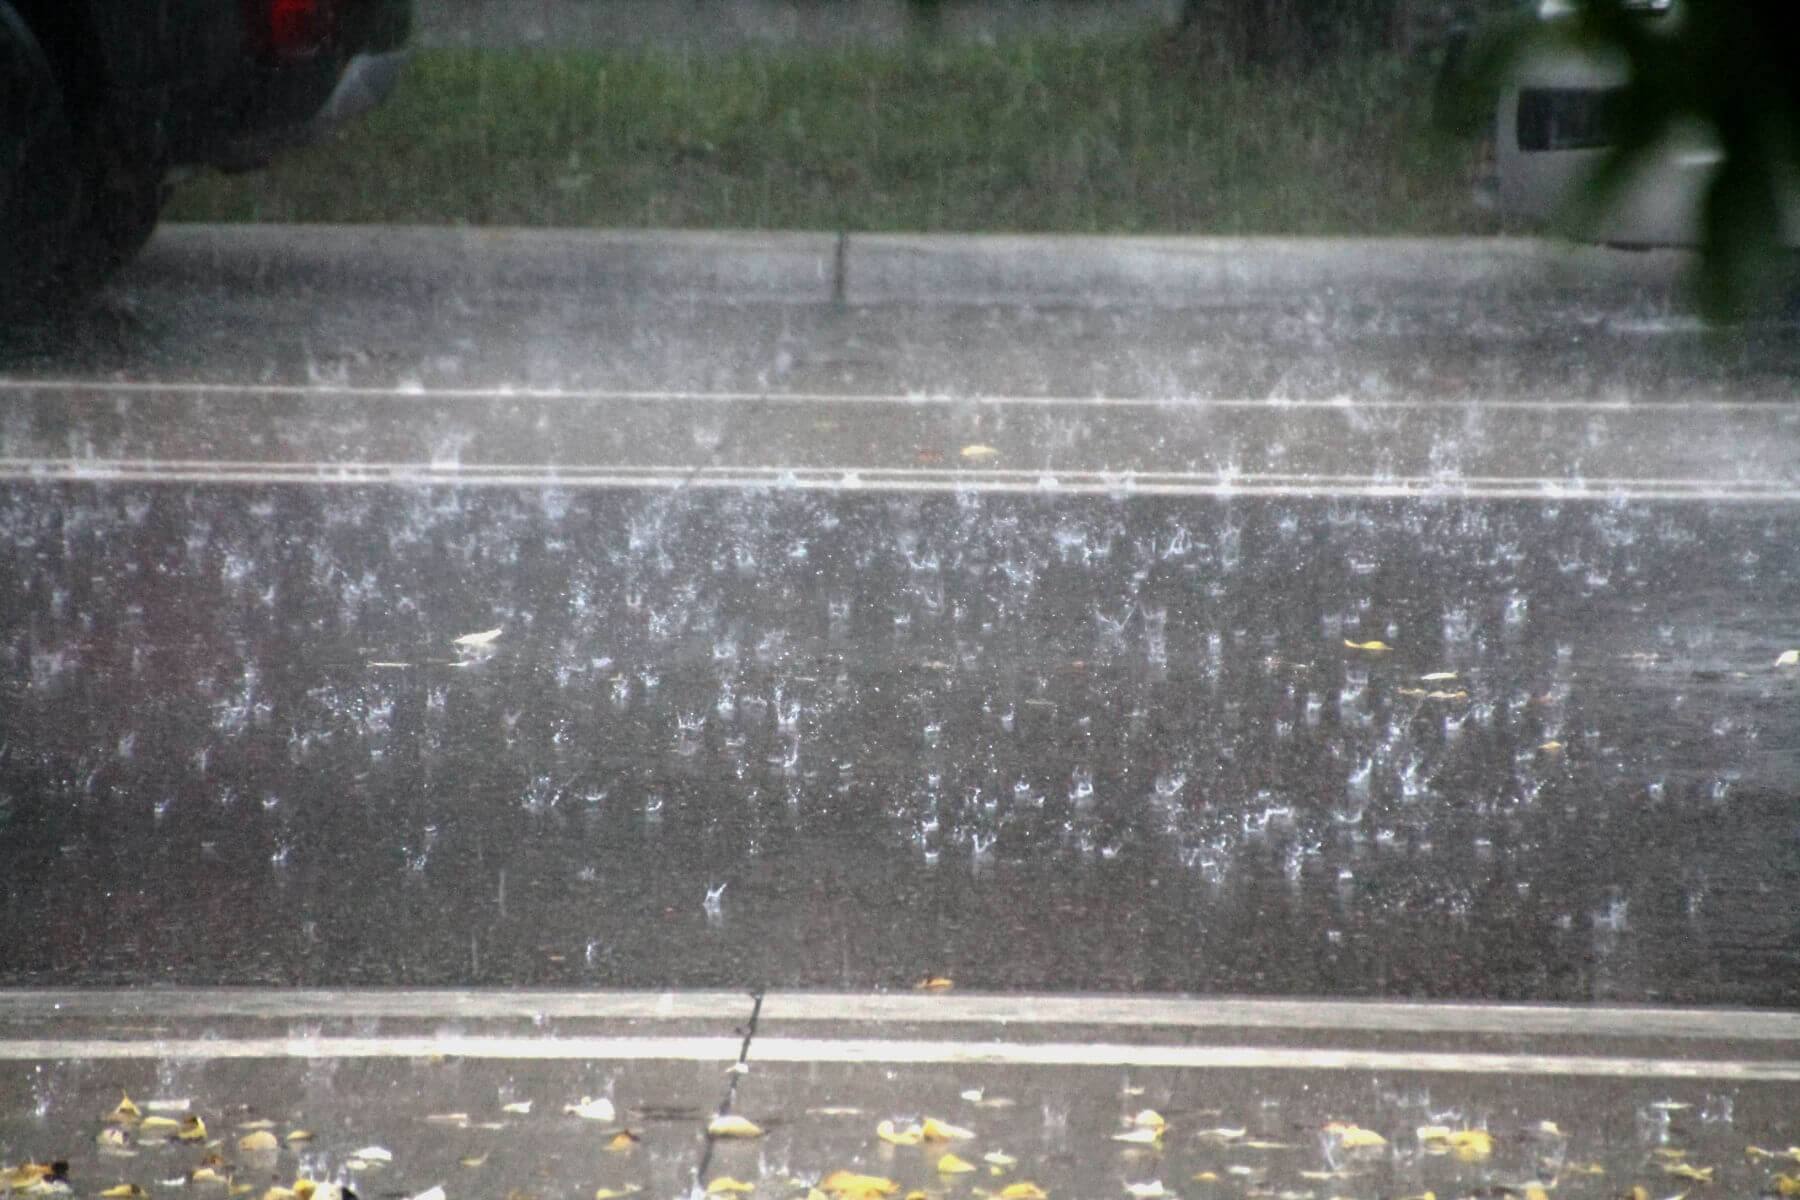 raindrops bouncing on the street